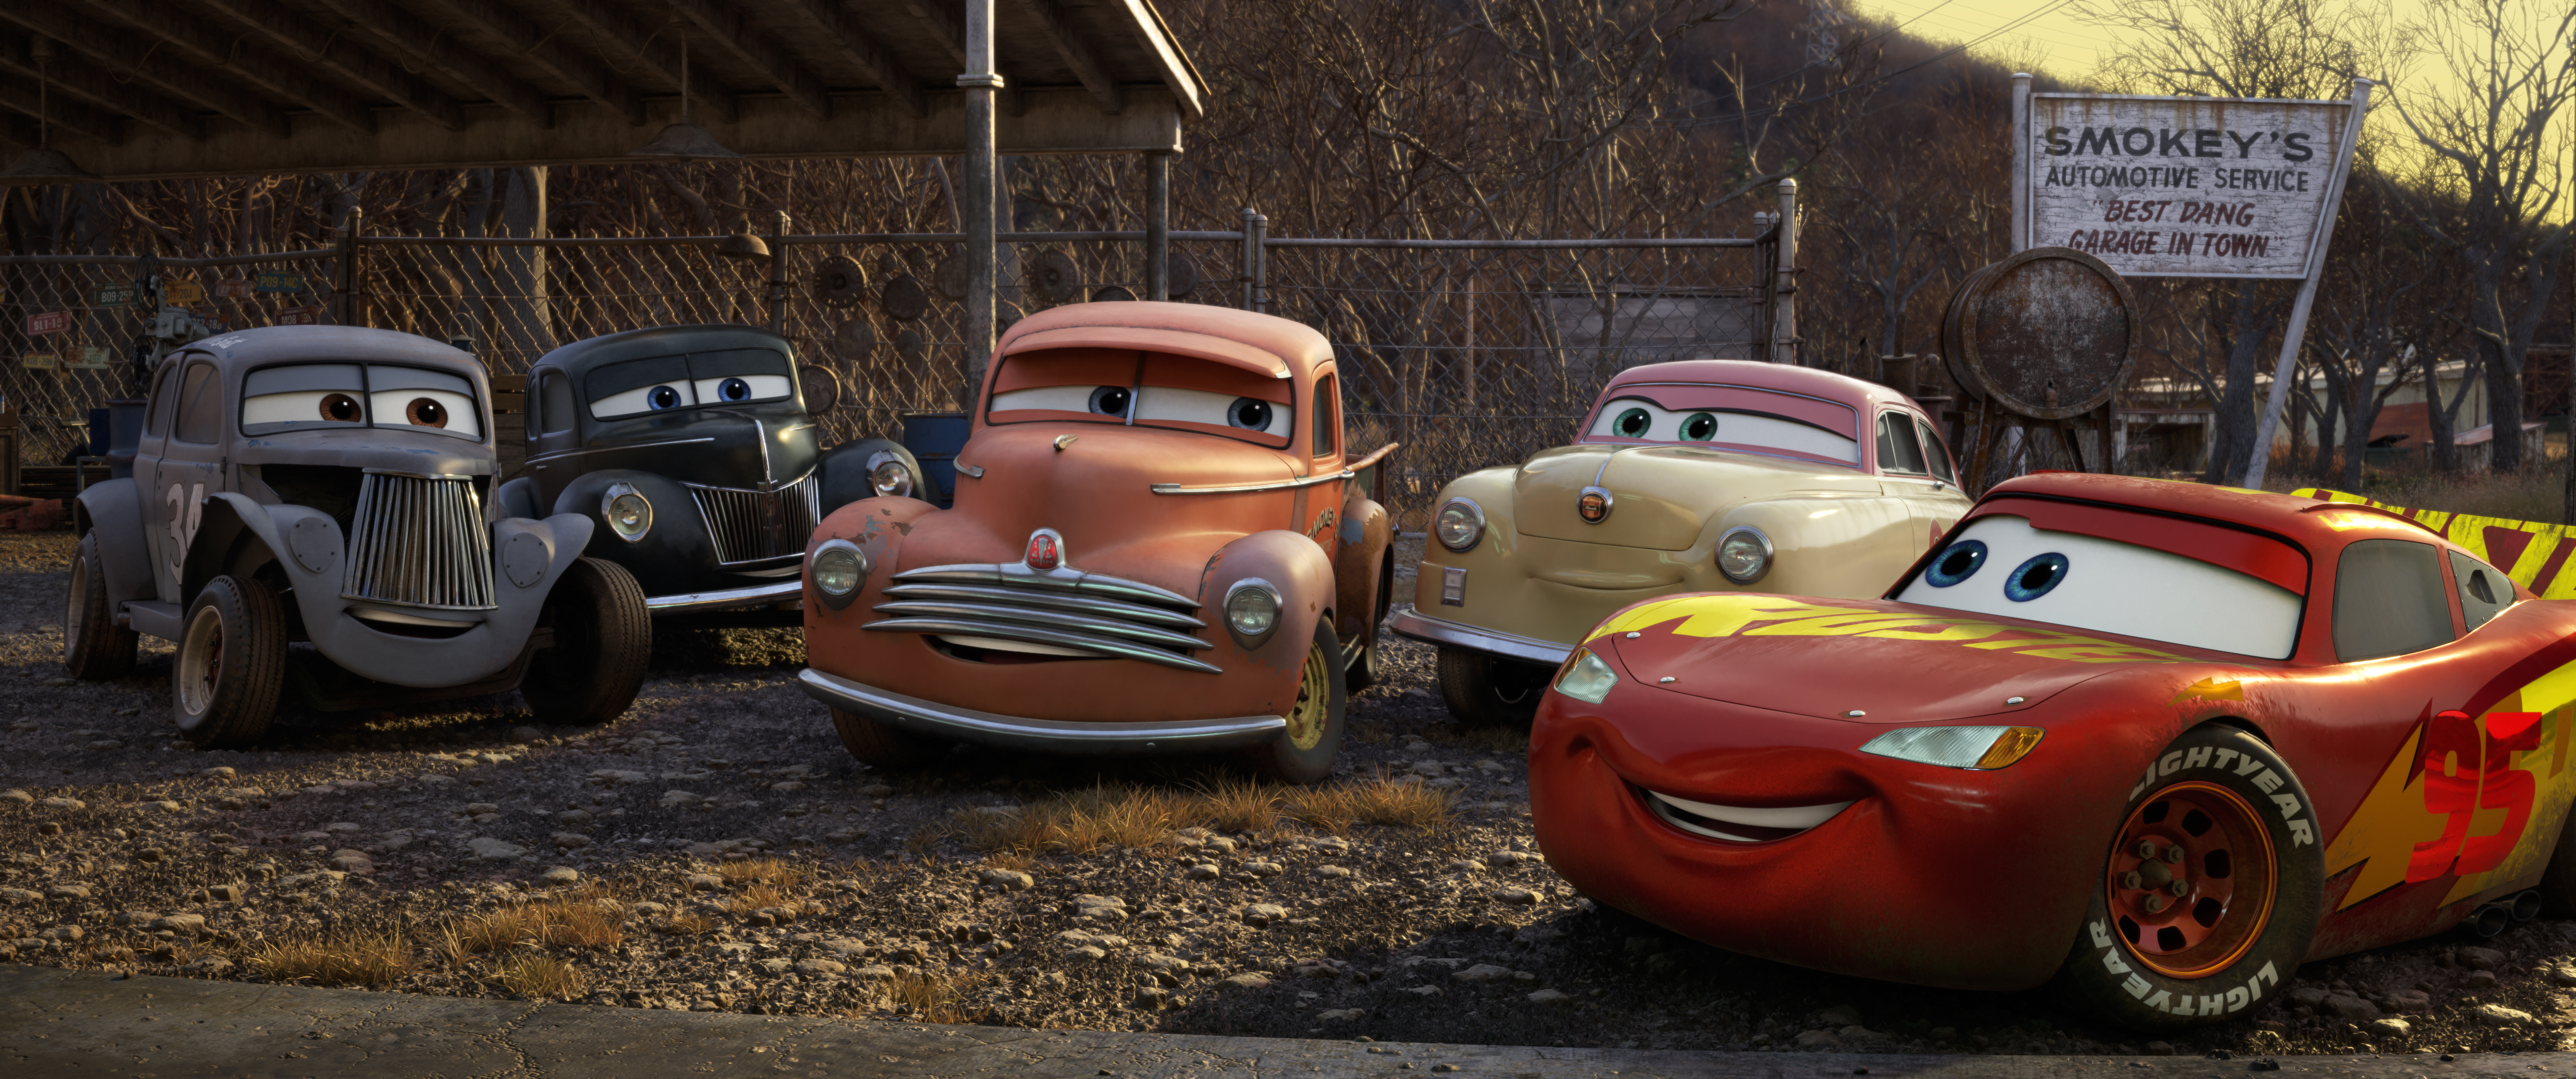 MOVIE REVIEW: Cars 3 — Every Movie Has a Lesson